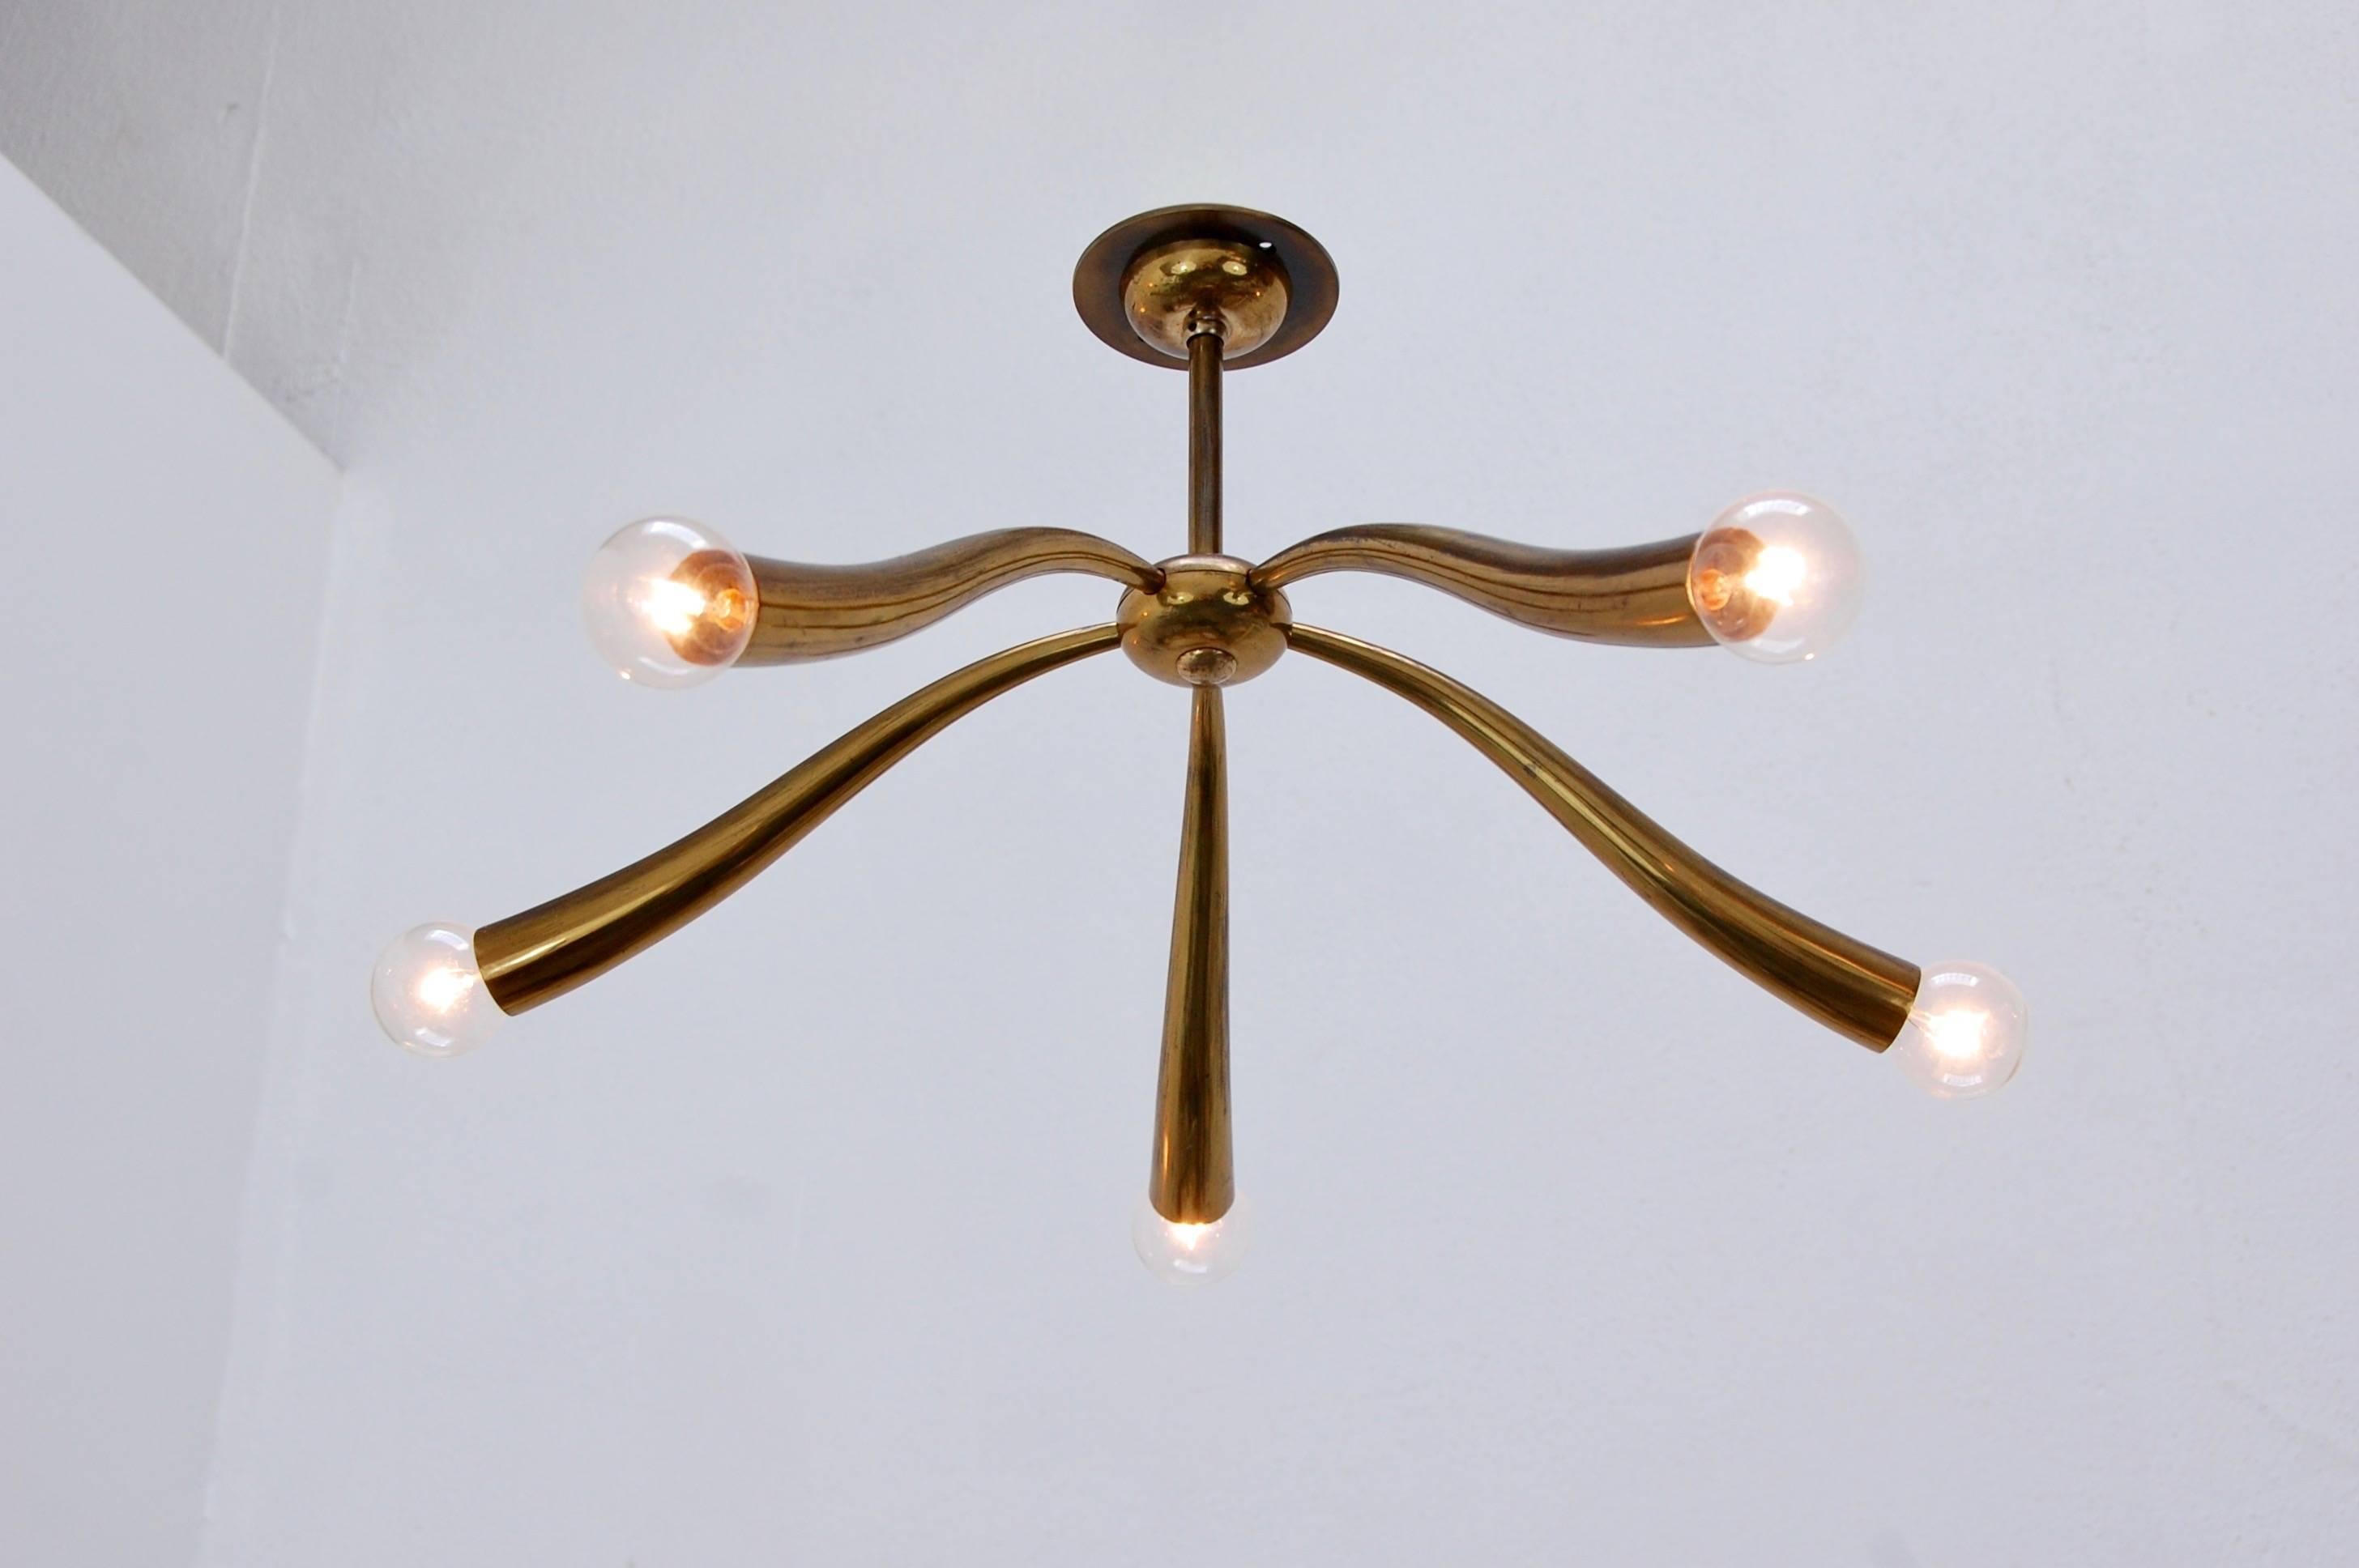 Of the period five-light Guglielmo Ulrich ceiling fixture from Italy. Partially restored, original brass finish, E12 candelabra based sockets, wired for the US. 

Measurements:
Overall drop 12”
Fixture height 7”
Diameter 23.

We at Lumfardo